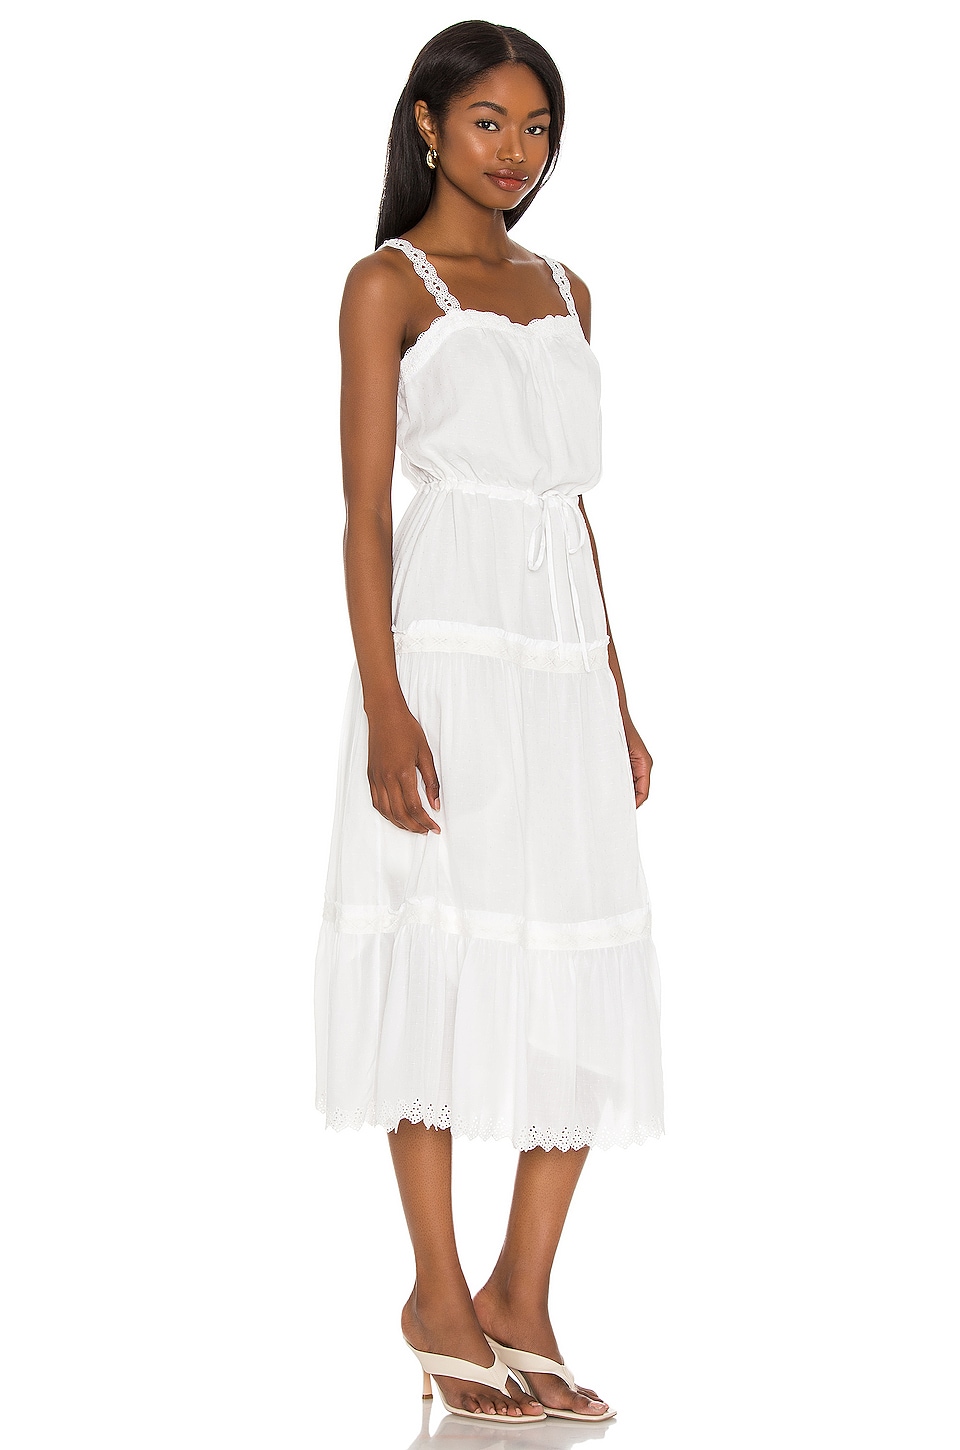 PAIGE Amity Dress in White | REVOLVE